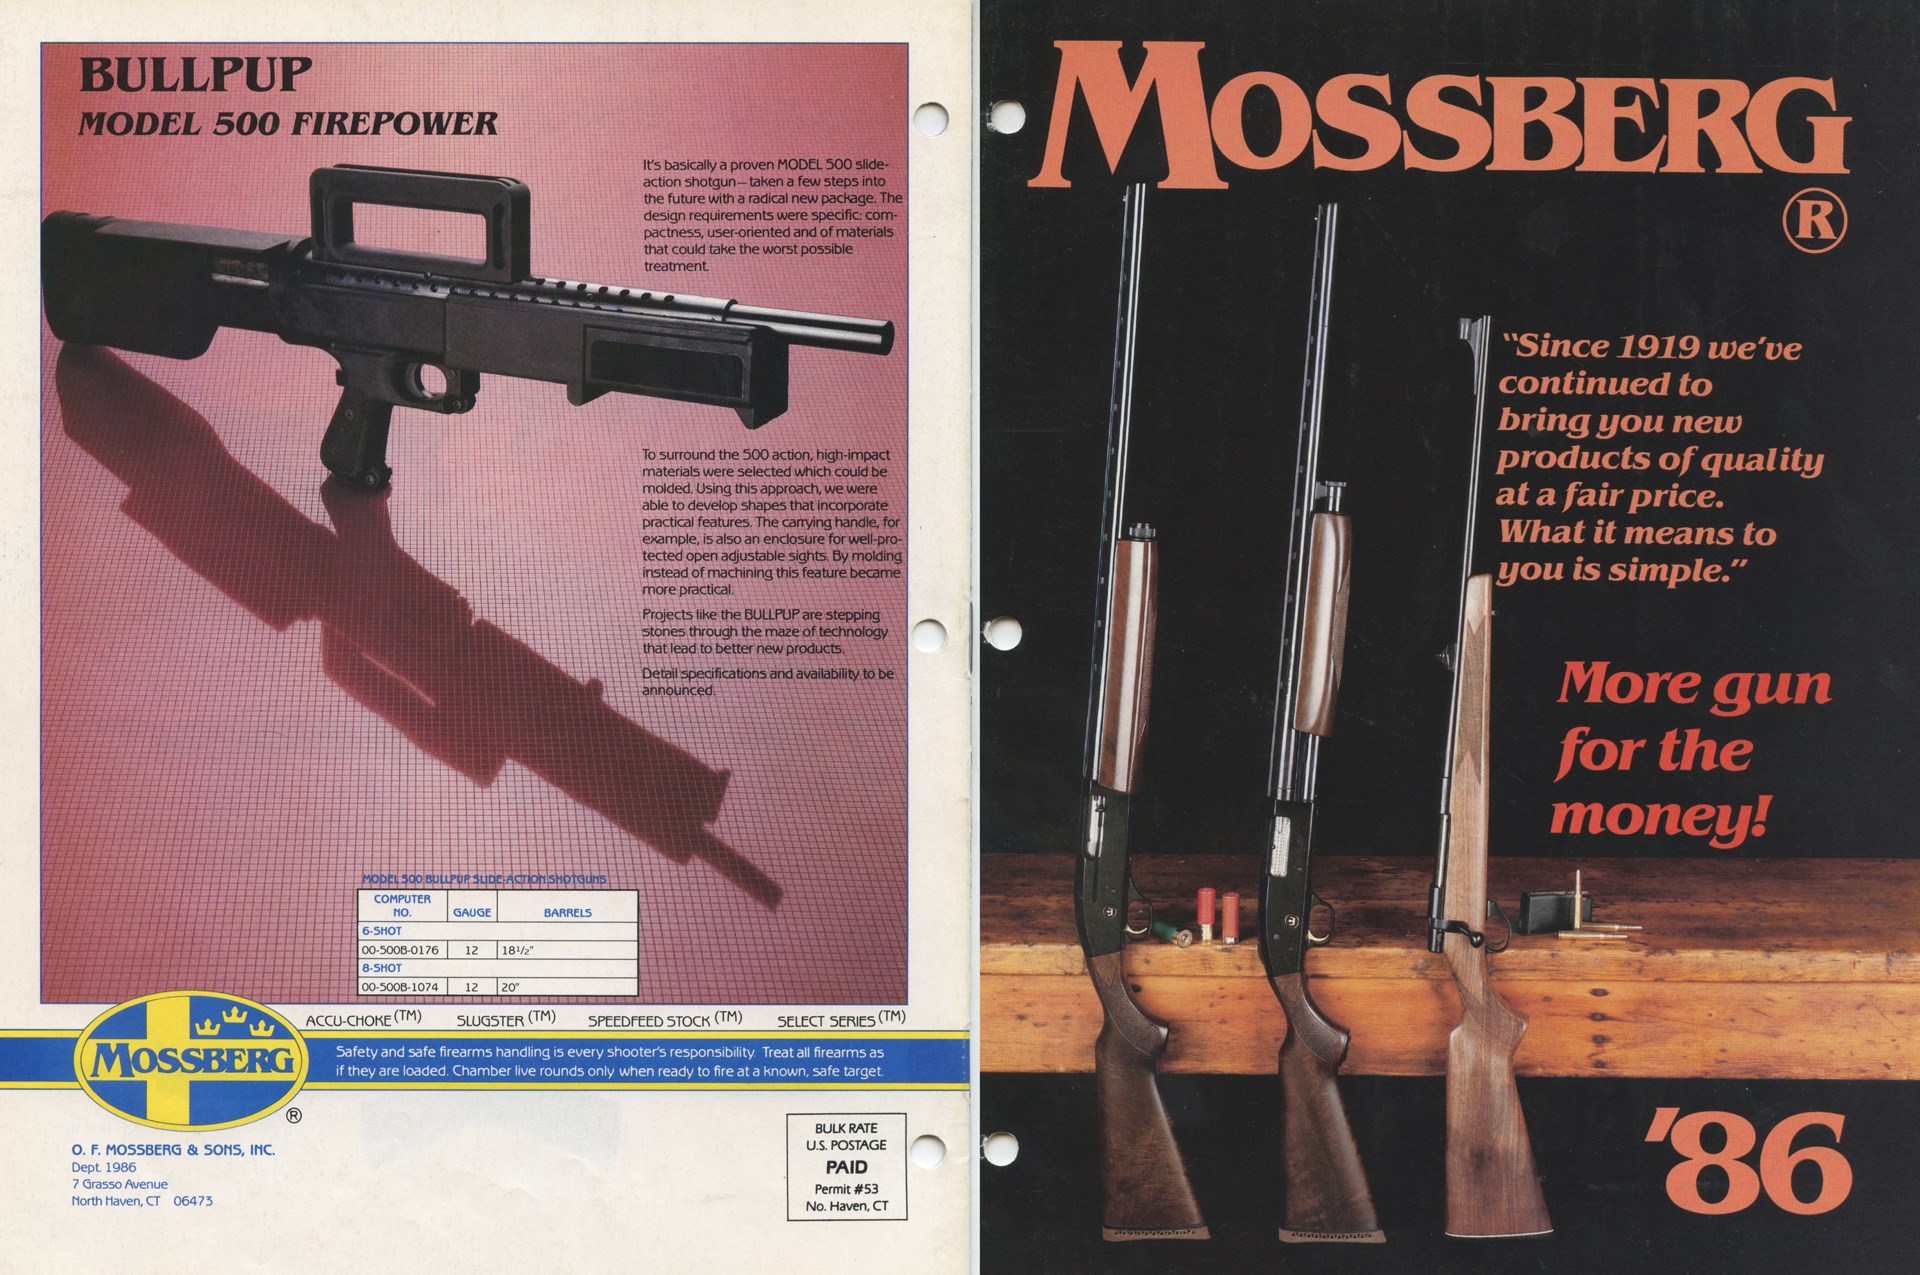 Mossberg gun catalog showing bullpup model 500 on left and catalog cover with rifles and shotgus on right text on image describing guns